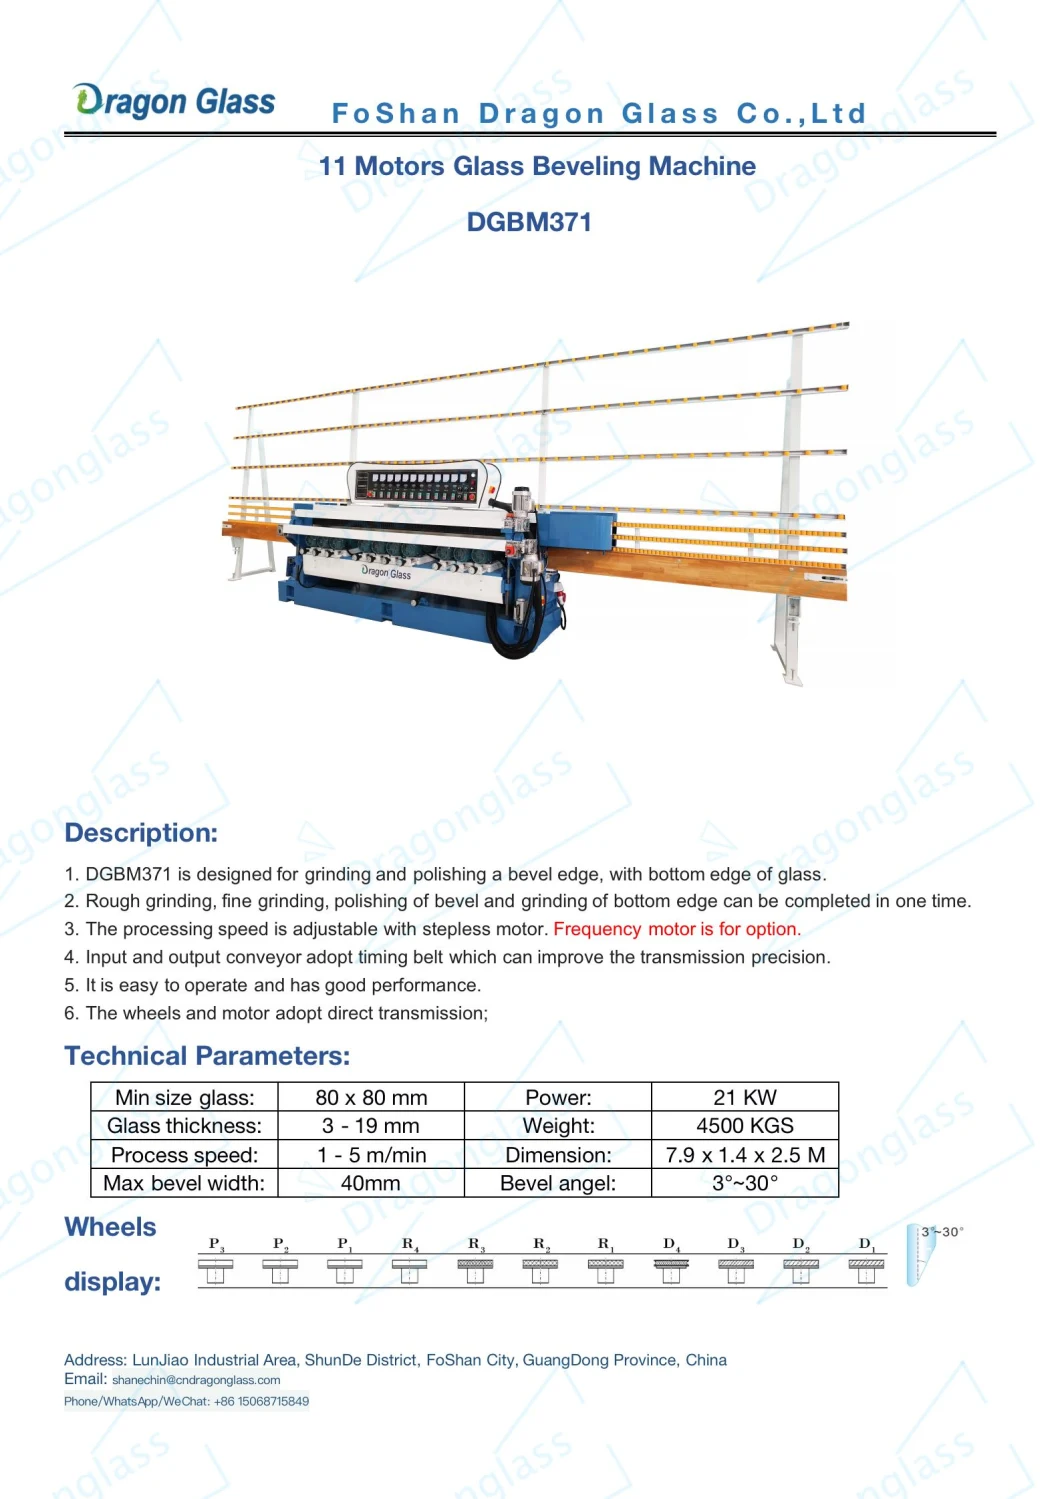 Mirror Glass 11 Spindle Glass Straight Line Bevel Edging Polishing Machine in High Speed Processing Machine